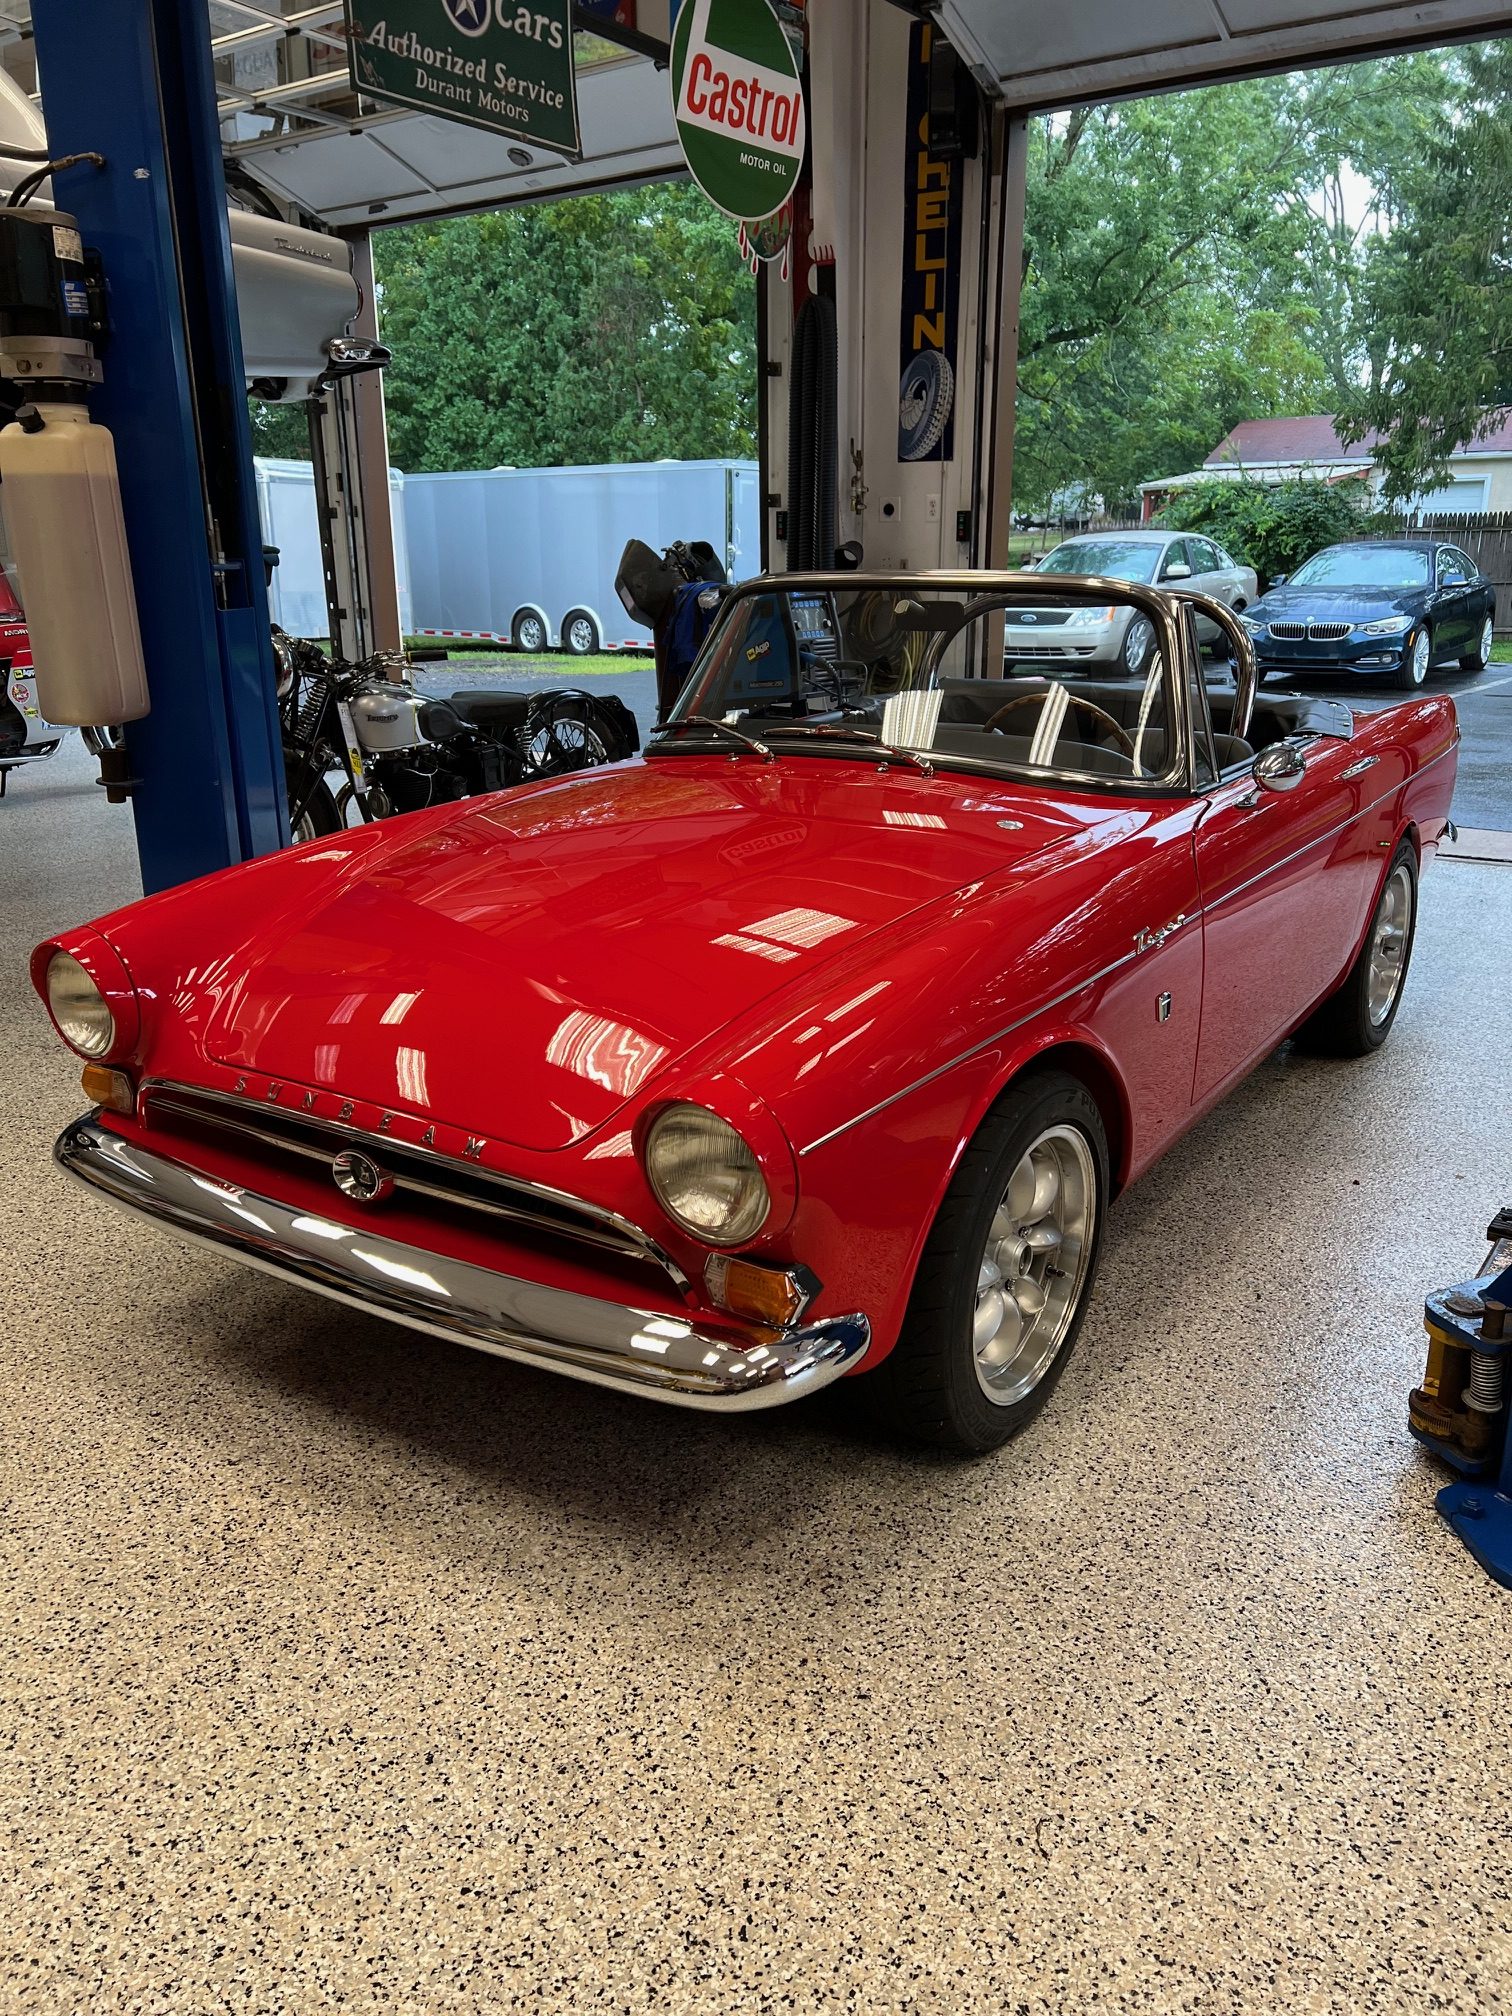 1966 Sunbeam Tiger Restored By Bang It Out - Blog Image